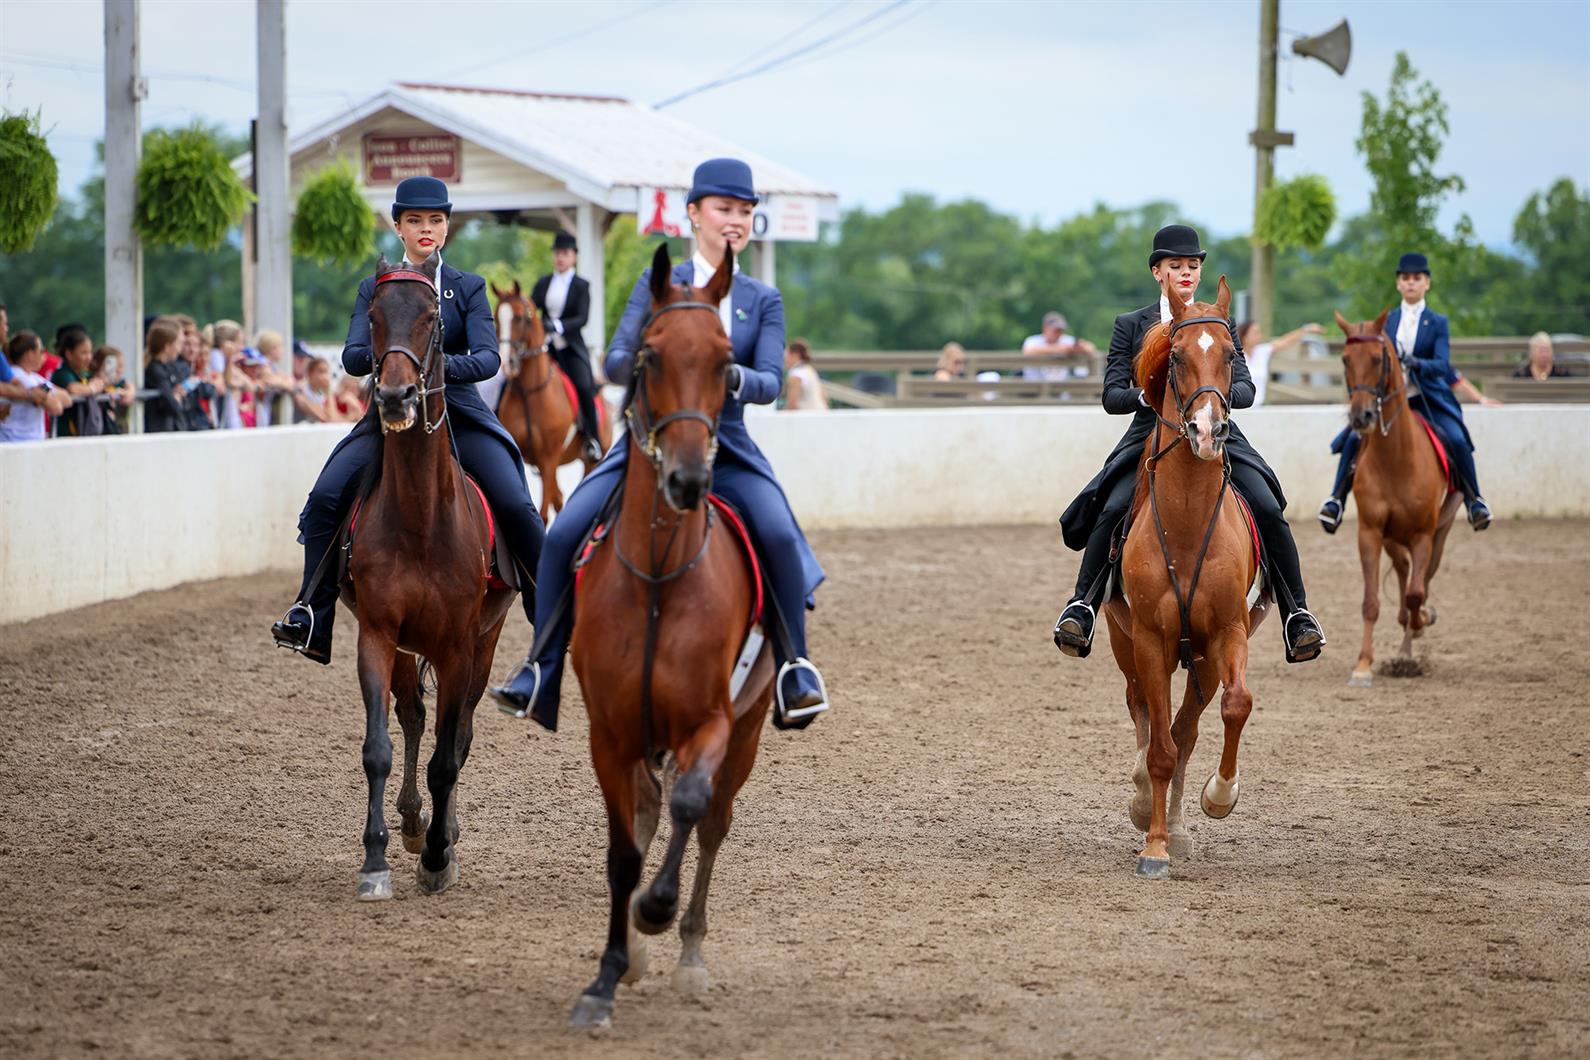 Riders competing in the 2022 Saddle Seat Equitation World Cup